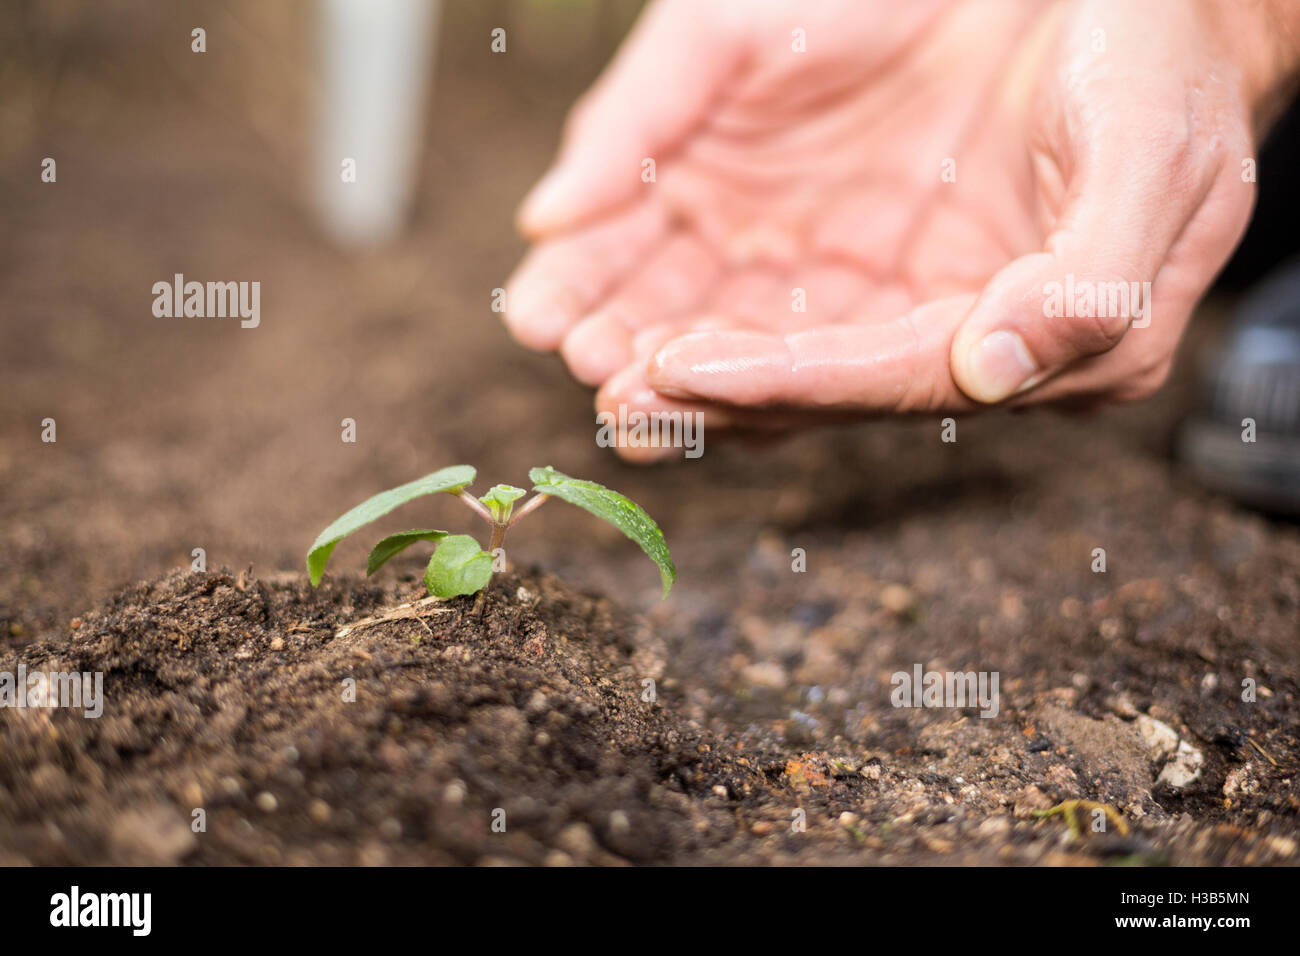 Gardener with hands cupped at greenhouse Stock Photo